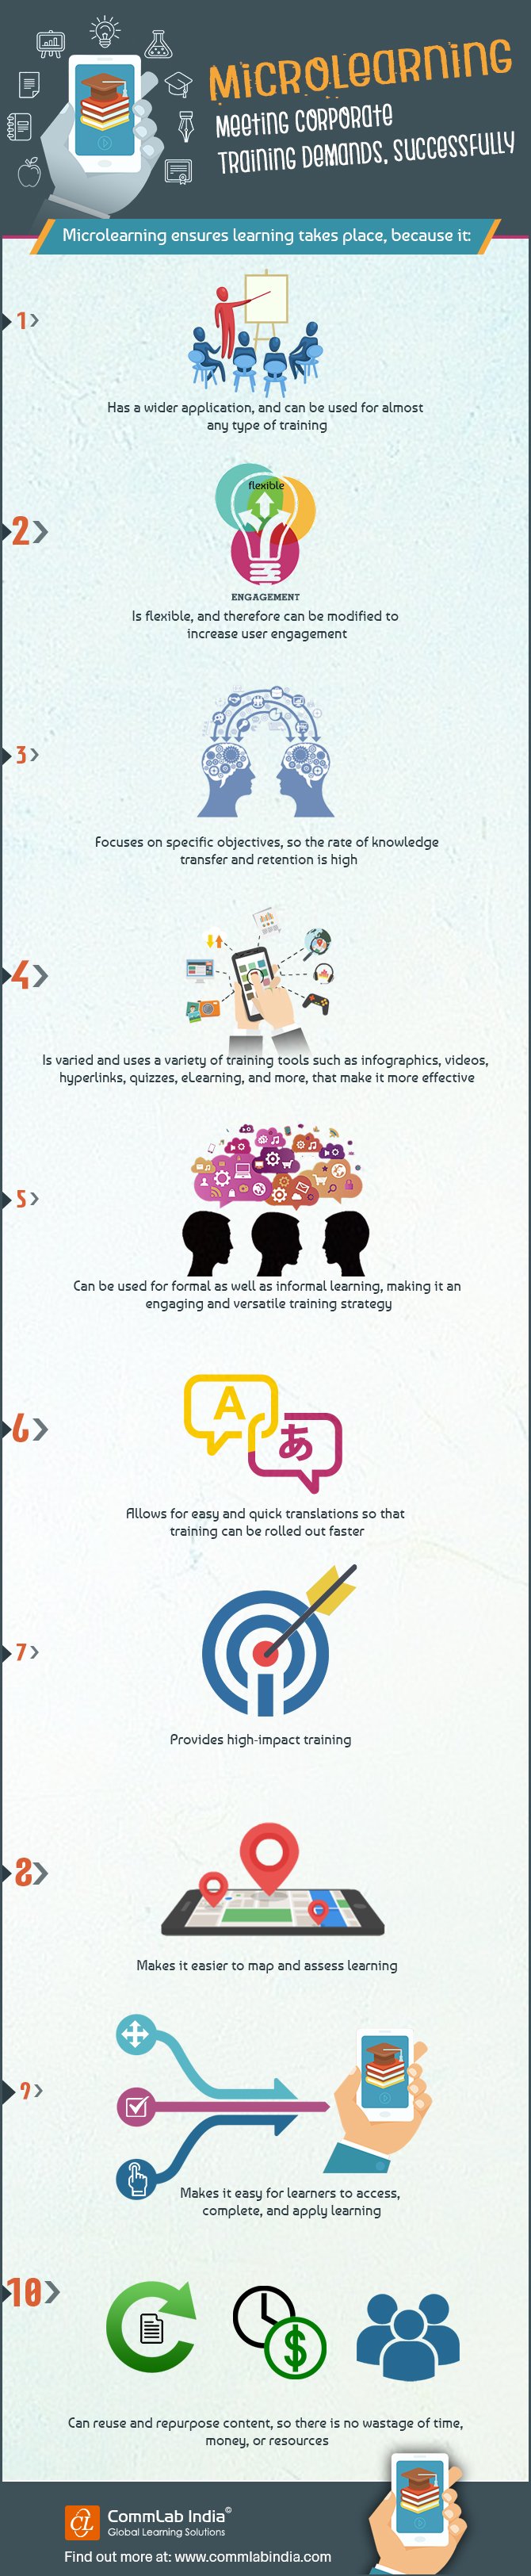 Microlearning - Meeting Corporate Training Demands, Successfully [Infographic]